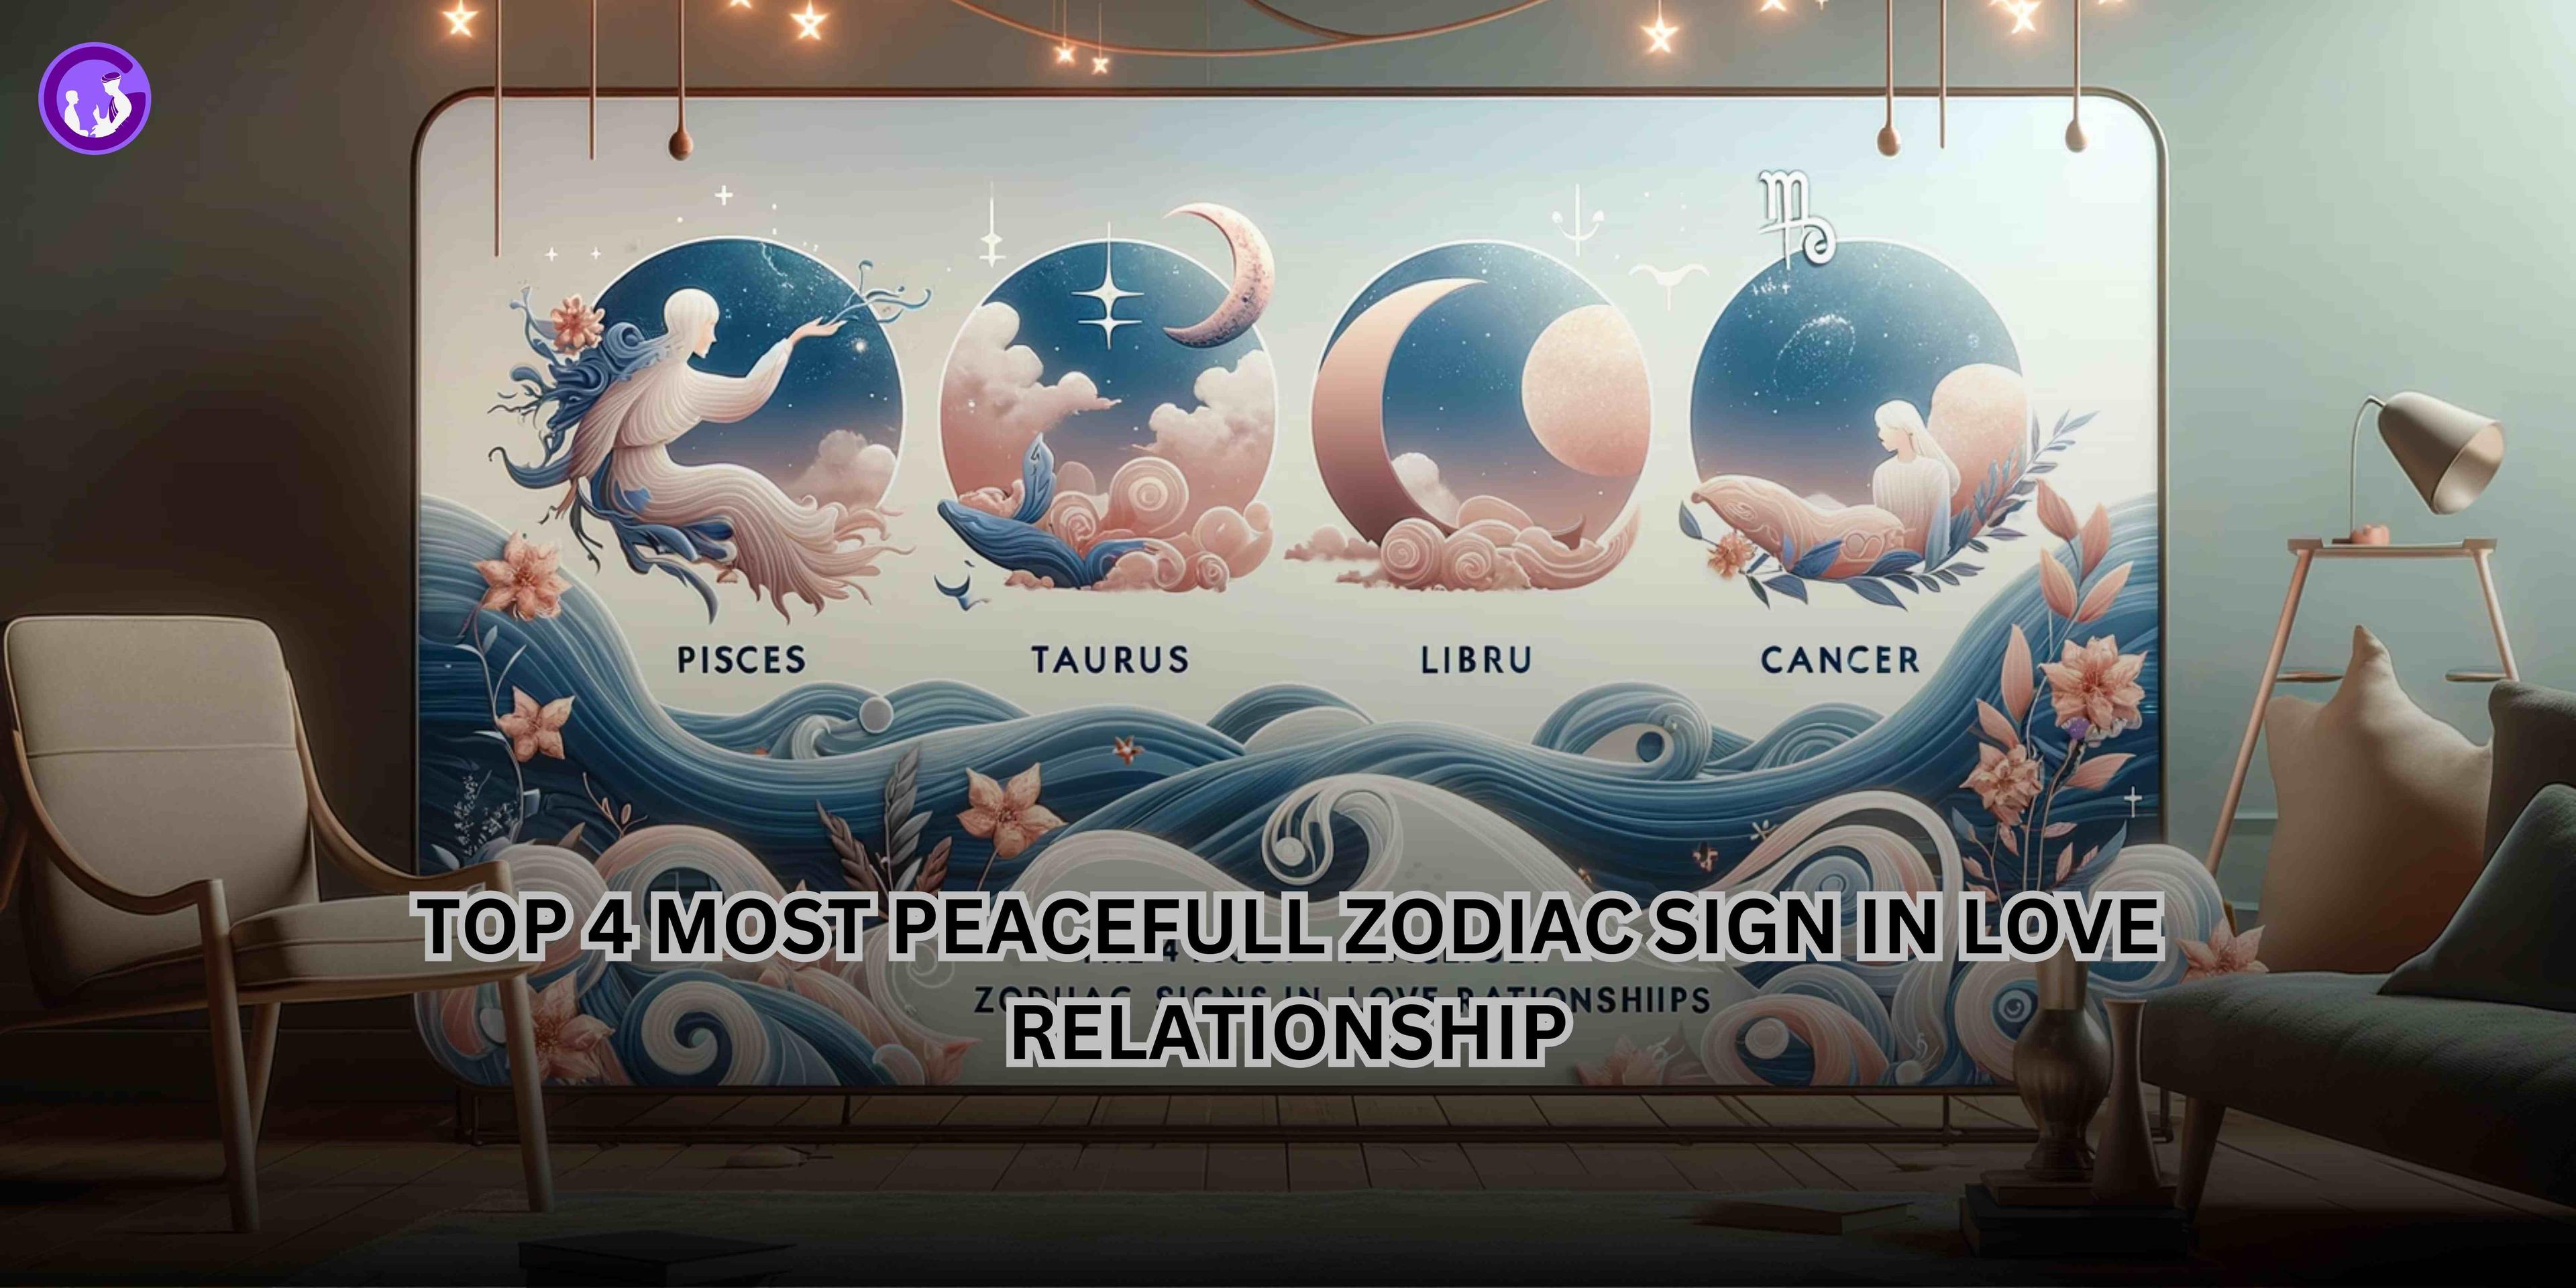 4 Zodiac Signs Known for Peaceful Love Bonds